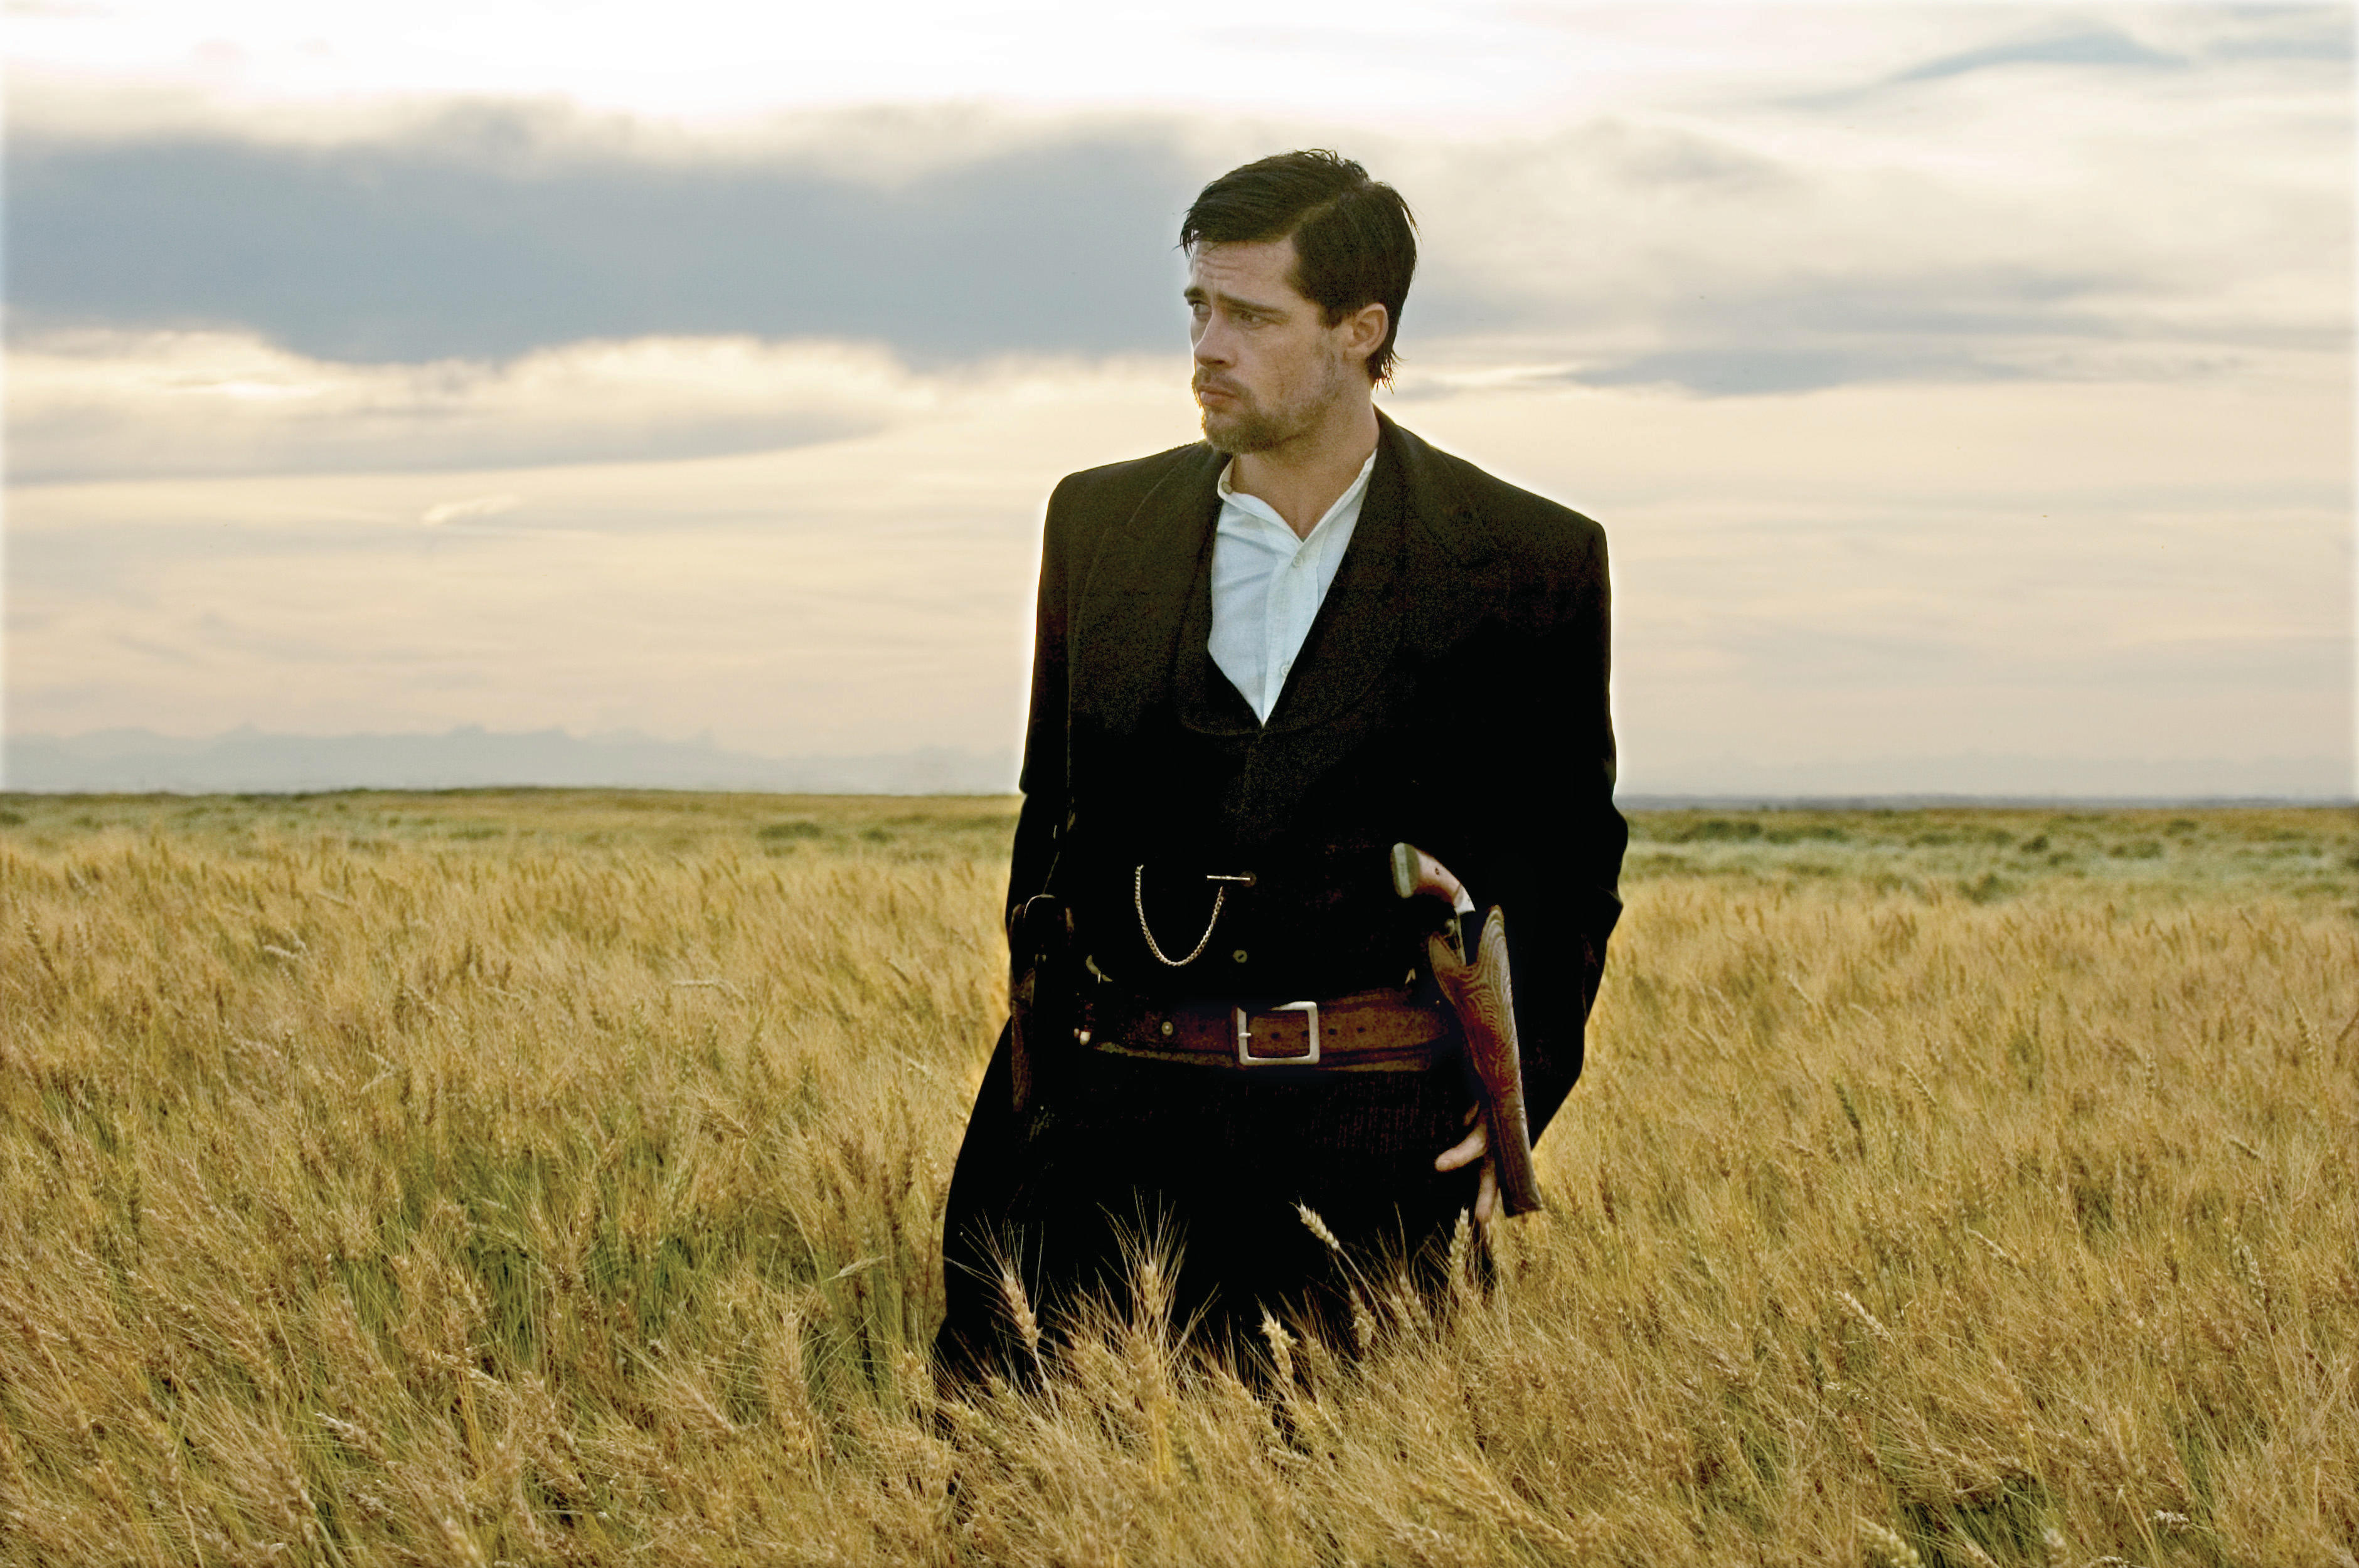 movie, the assassination of jesse james by the coward robert ford